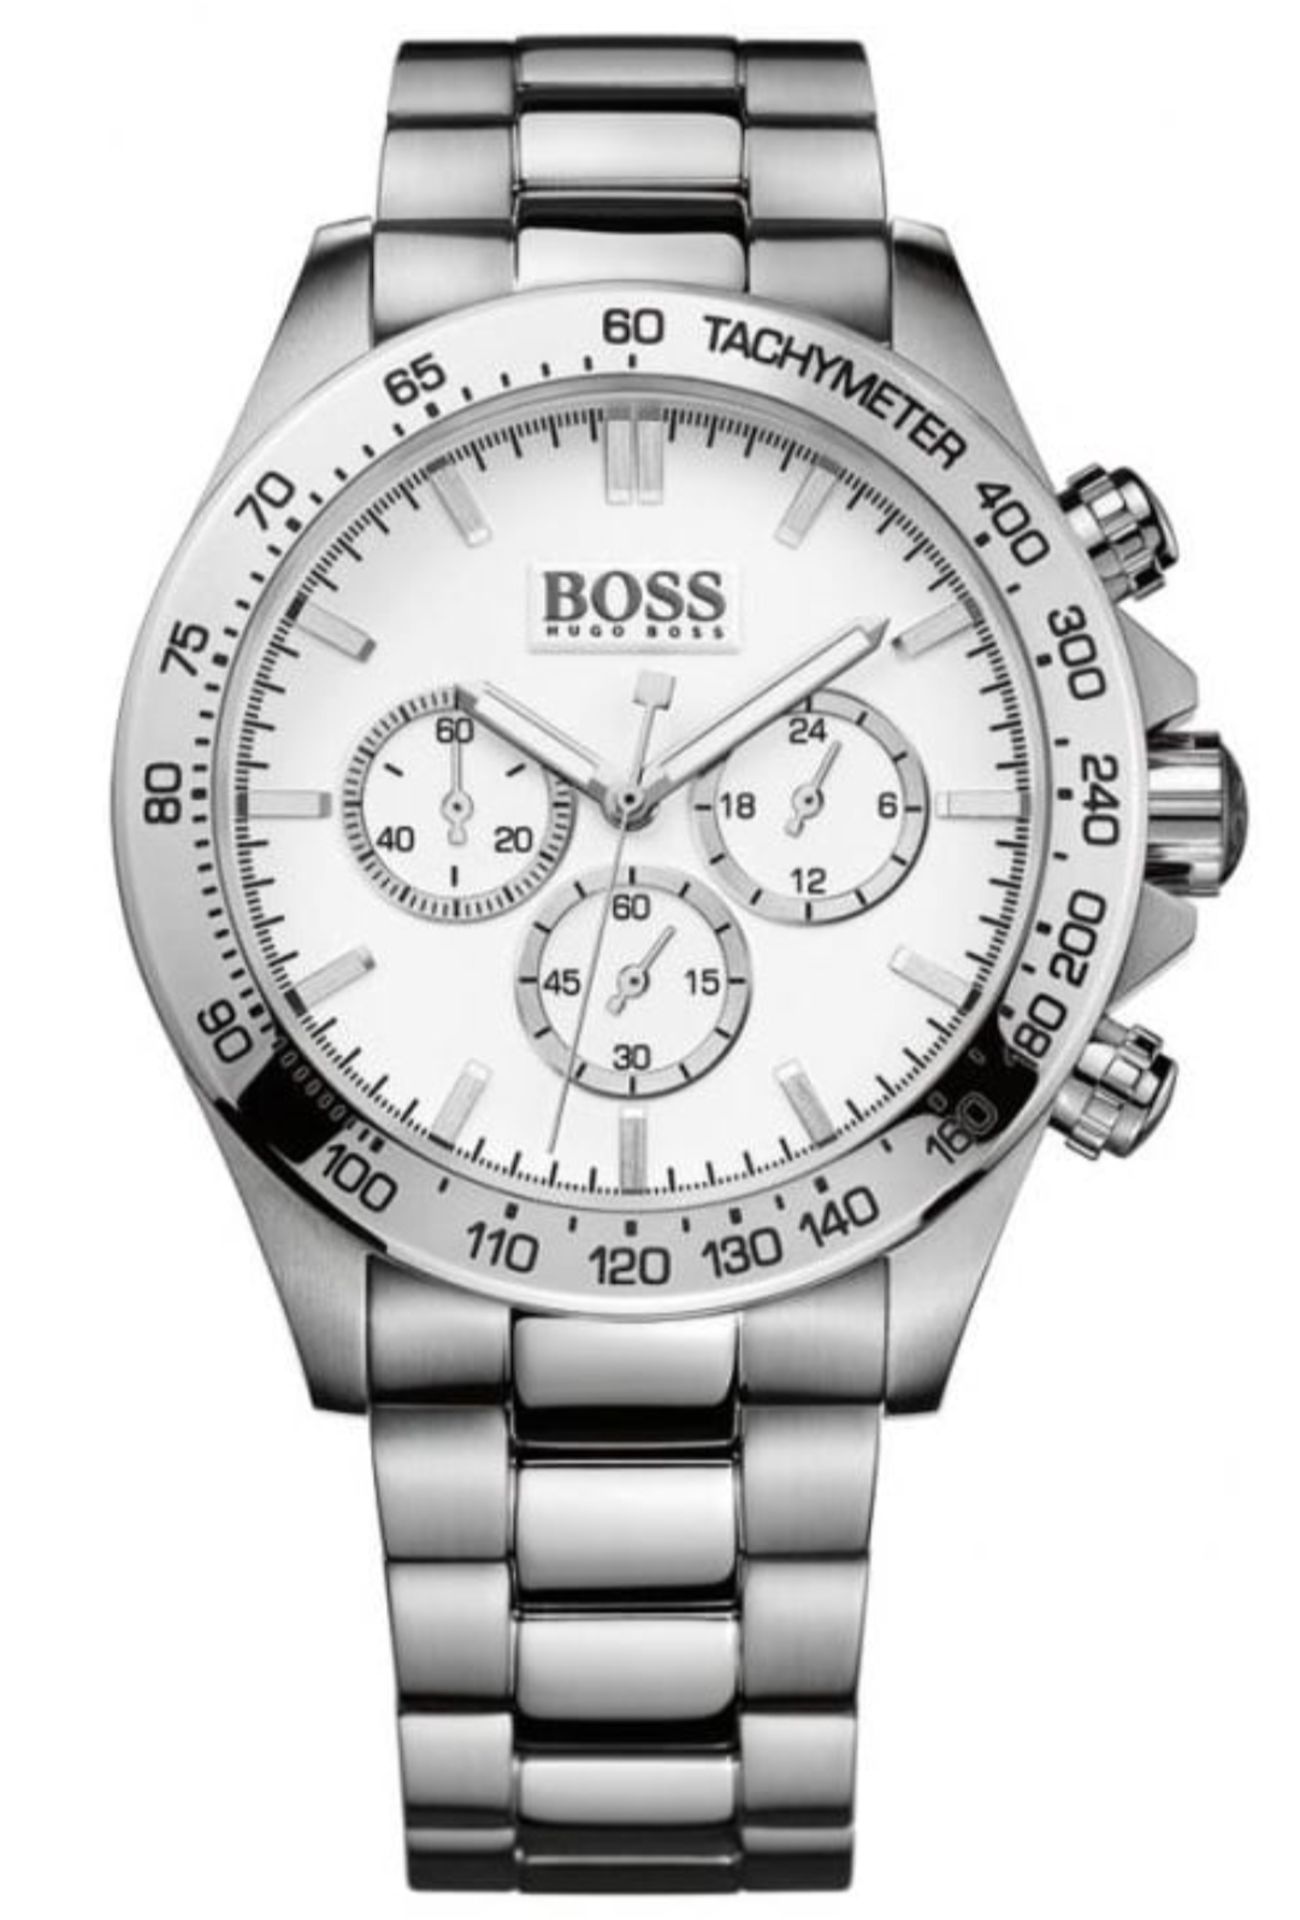 Hugo Boss Trade Lot 1C. A Total Of 20 Brand New Hugo Boss Watches - Image 3 of 20